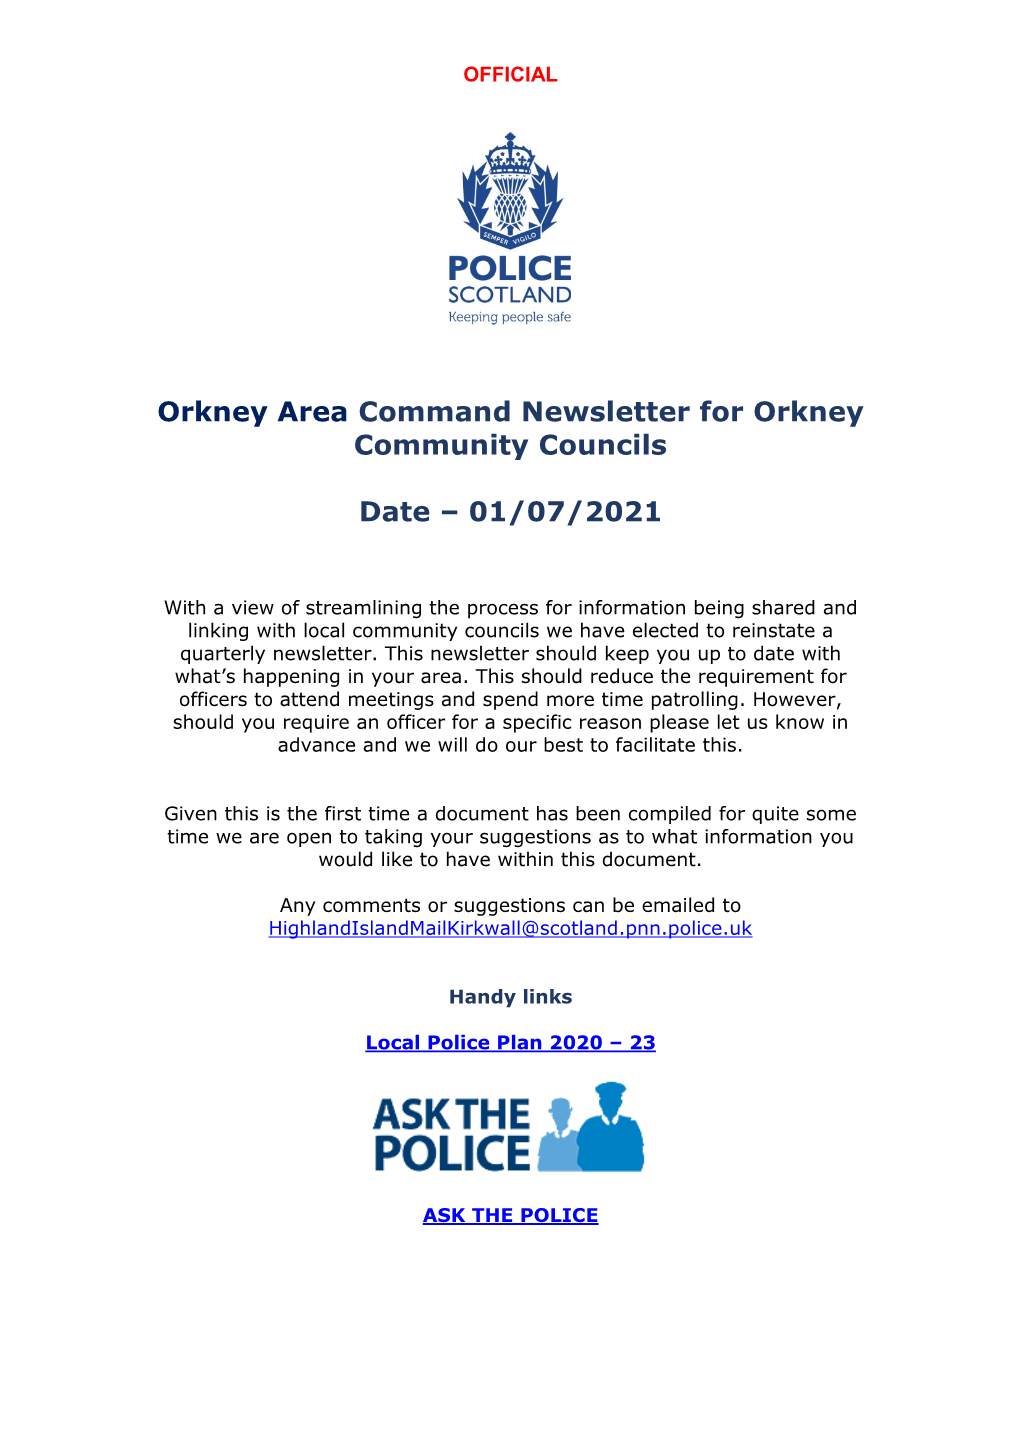 Orkney Area Command Newsletter for Orkney Community Councils Date